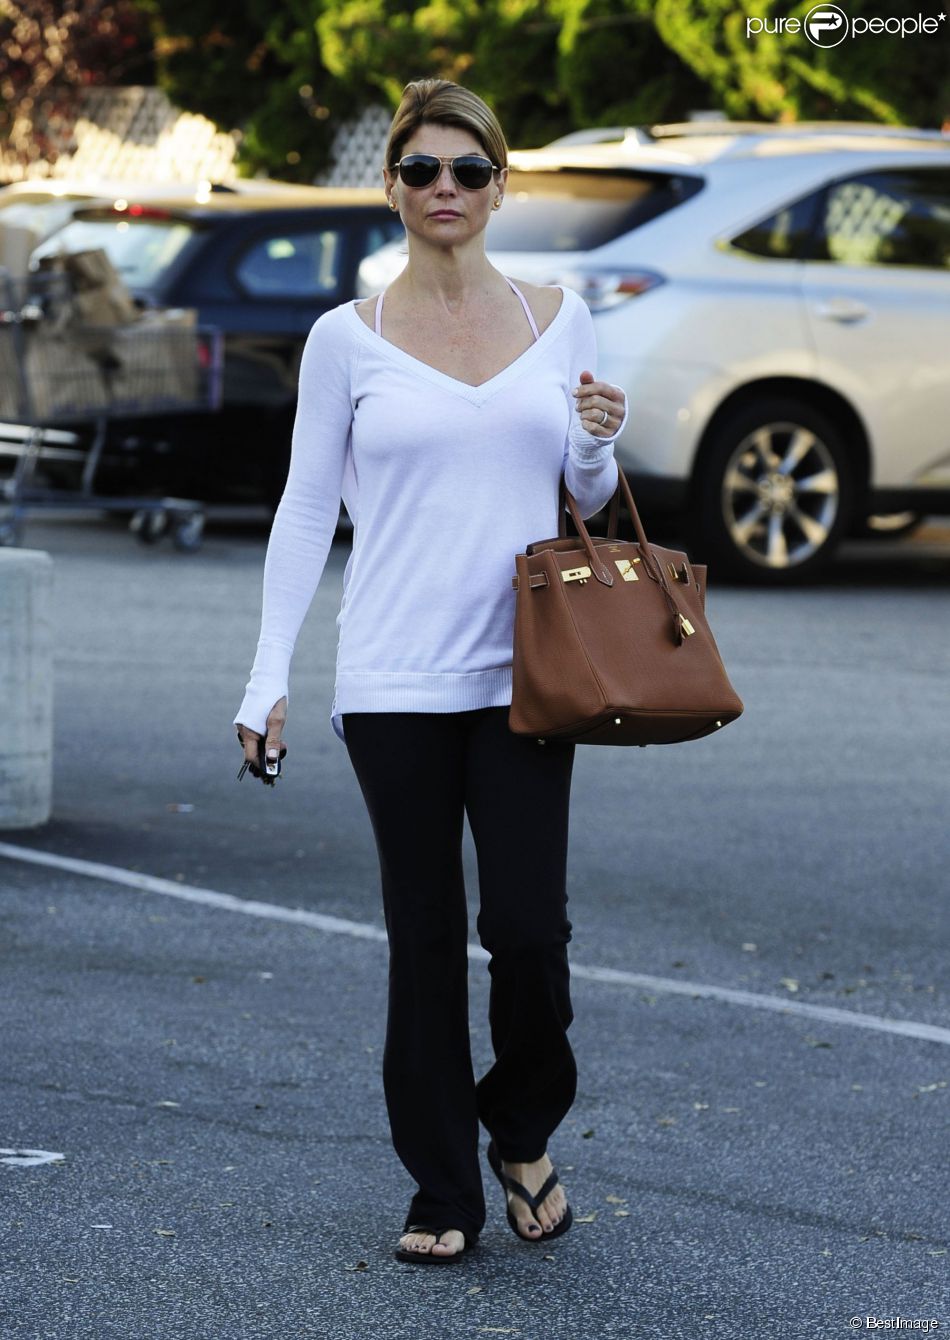 Lori Loughlin va faire des courses avec sa fille Isabella, a Beverly Hills, le 7 novembre 2012.  Please hide children&#039;s face prior to the publication - Lori Loughlin stops by Bristol Farms in Beverly Hills, CA with her daughter Isabella on November 7th, 2012.07/11/2012 - Beverly Hills